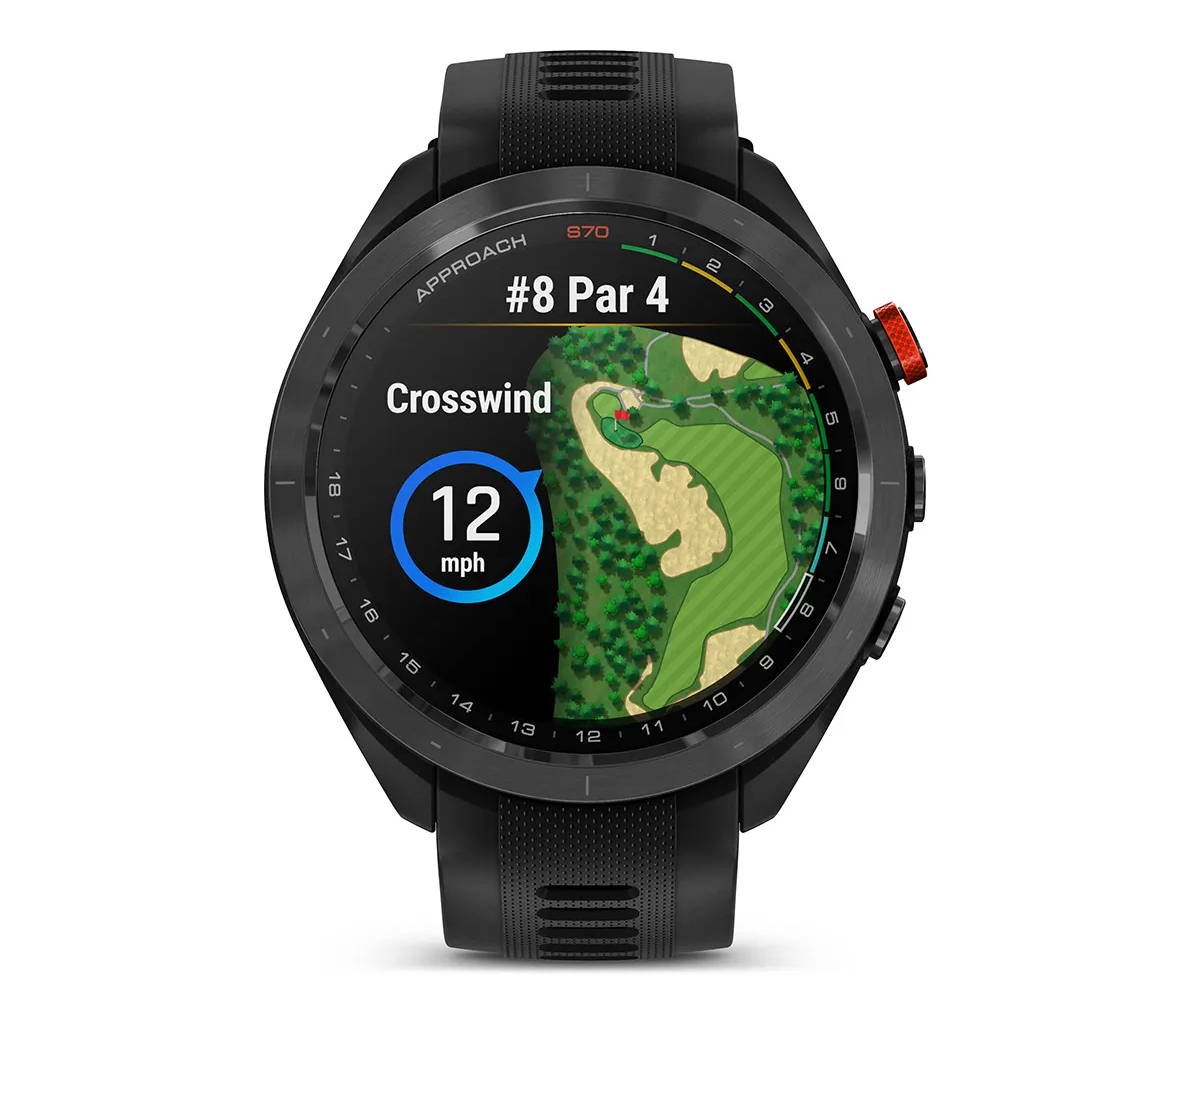 Black Garmin Approach S70 golf watch with overhead image of a green on the course with the crosswind number on the display